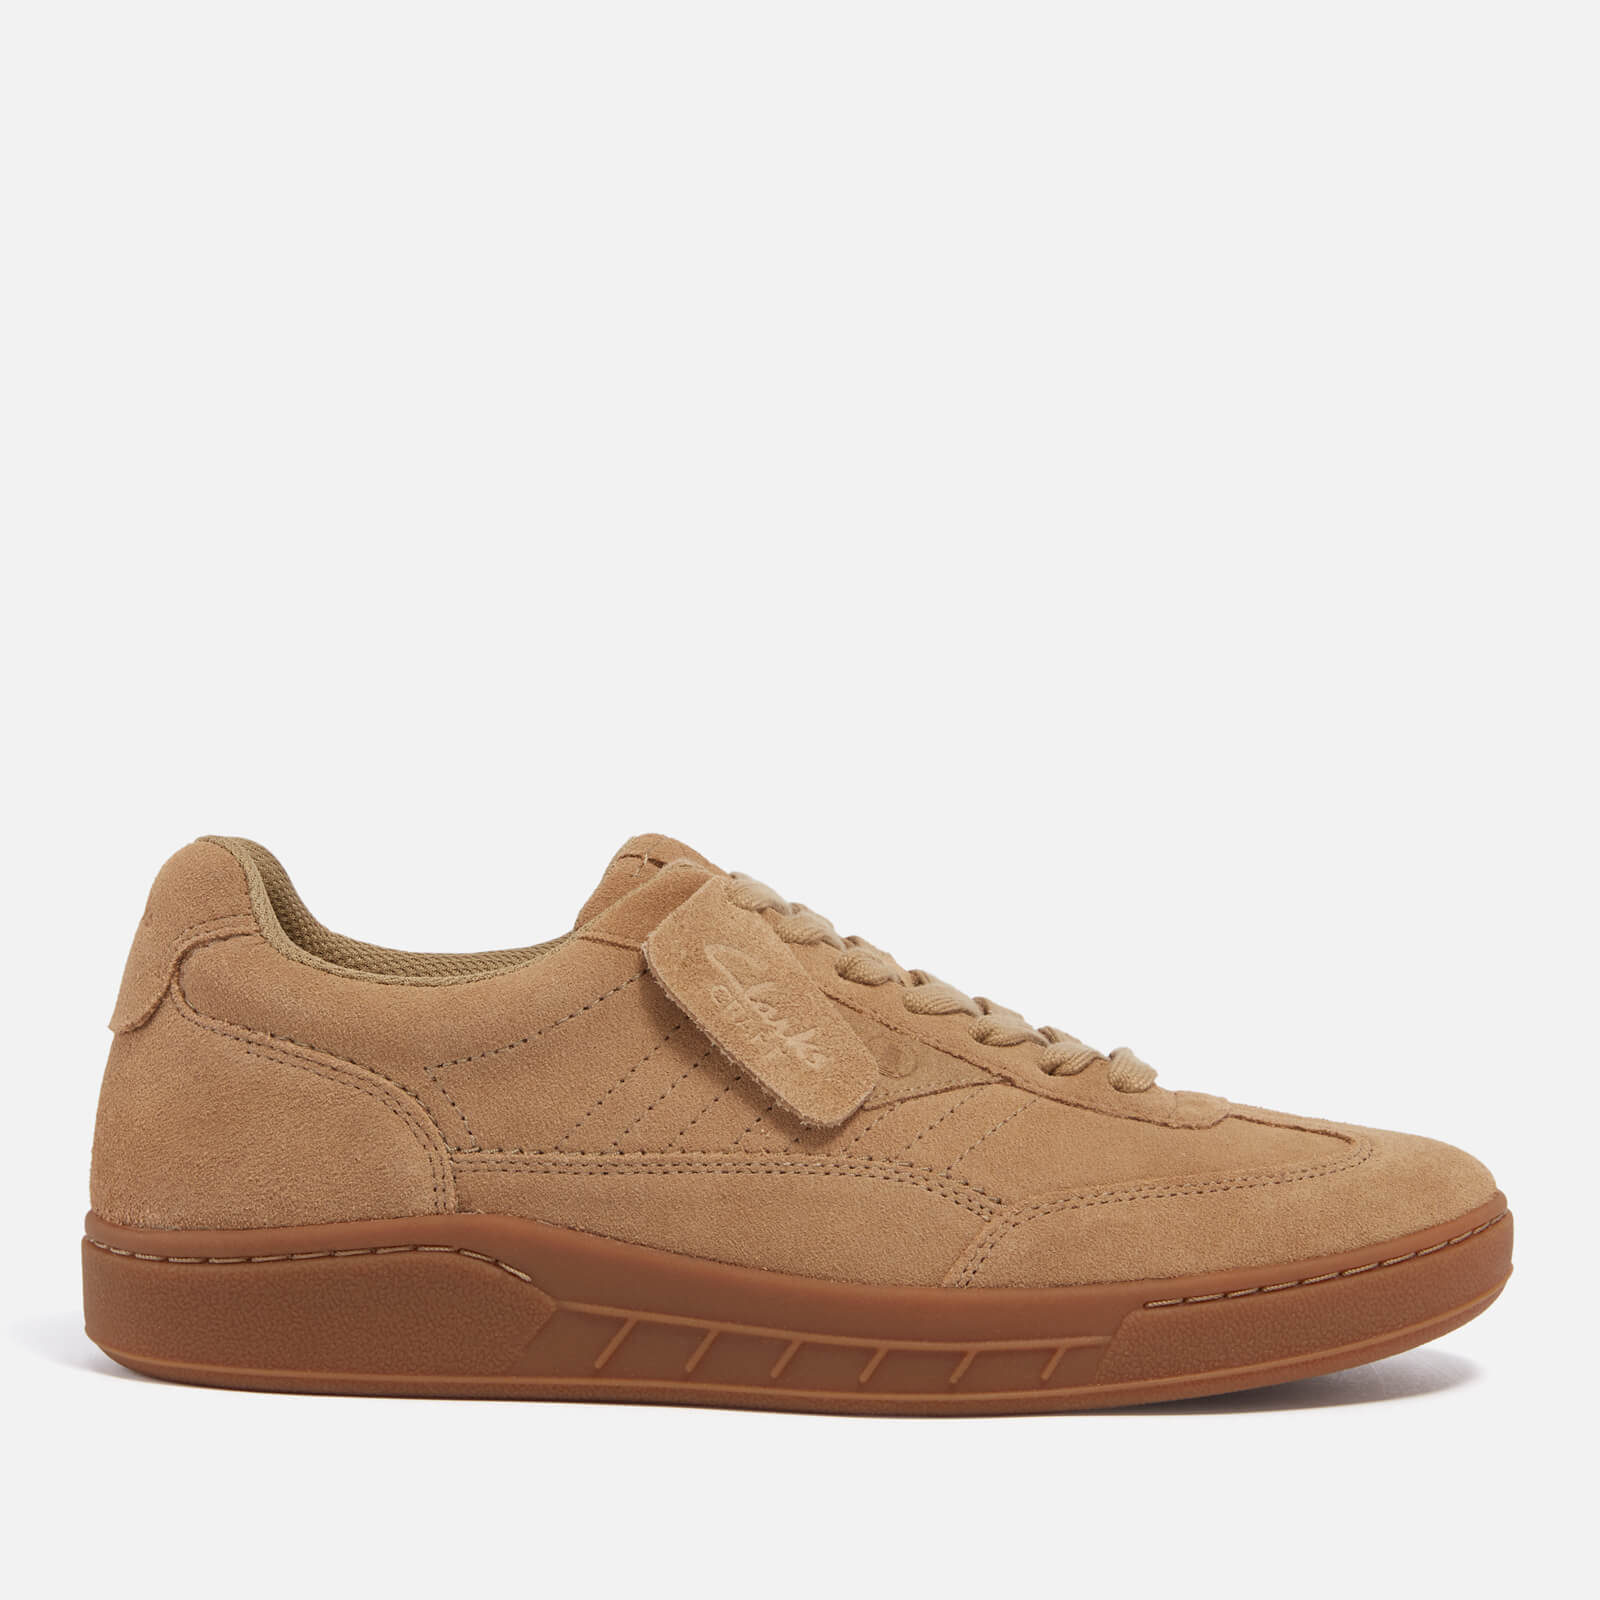 clarks men's craft rally ace suede trainers - uk 8